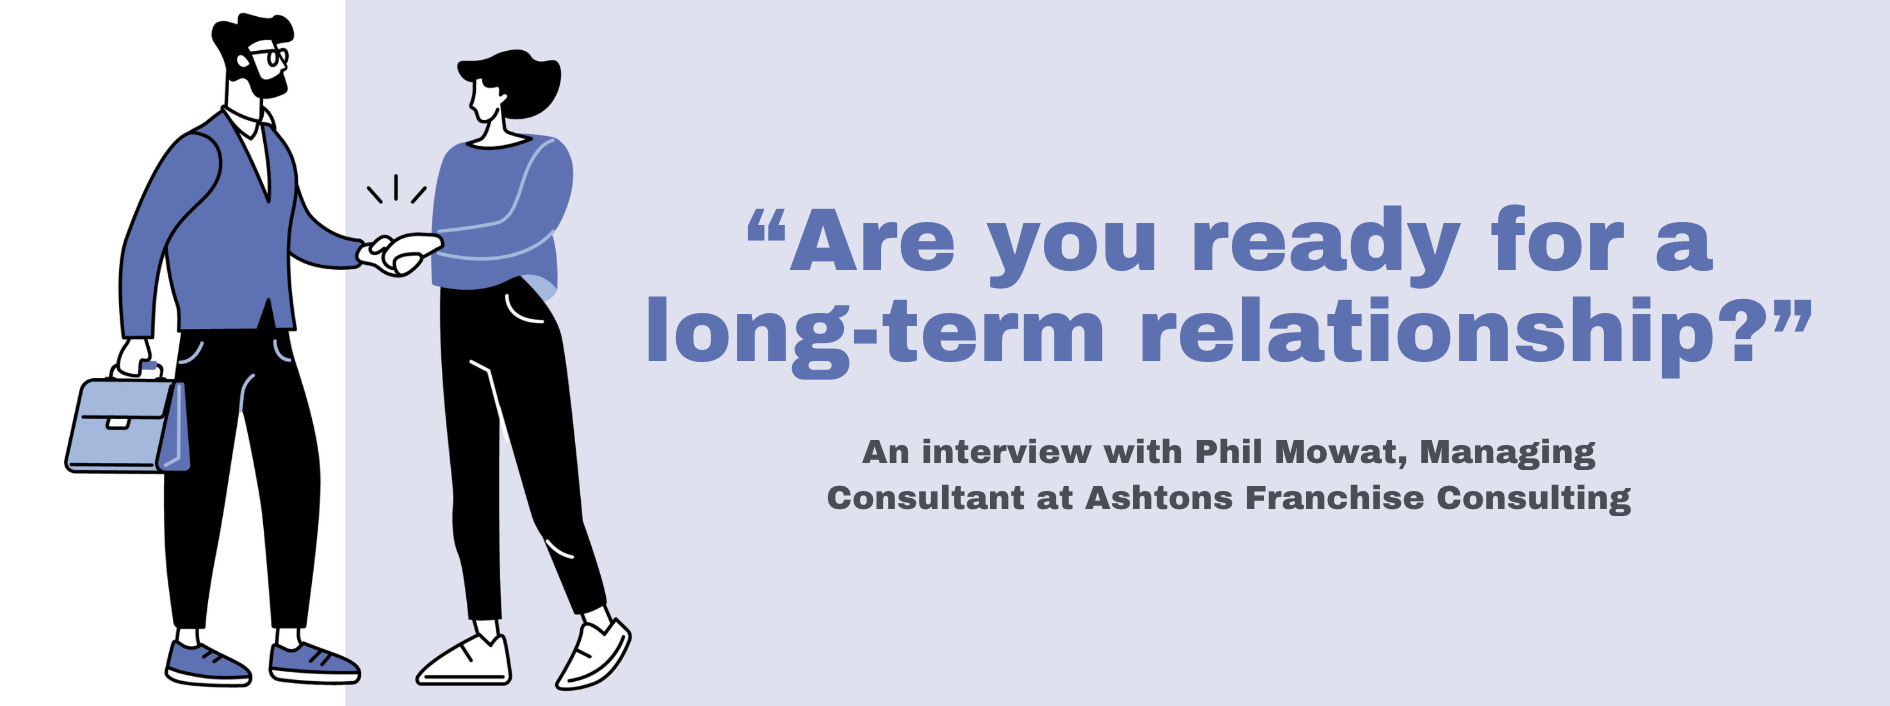 Interview with Phil Mowat, Ashtons Franchise Consulting